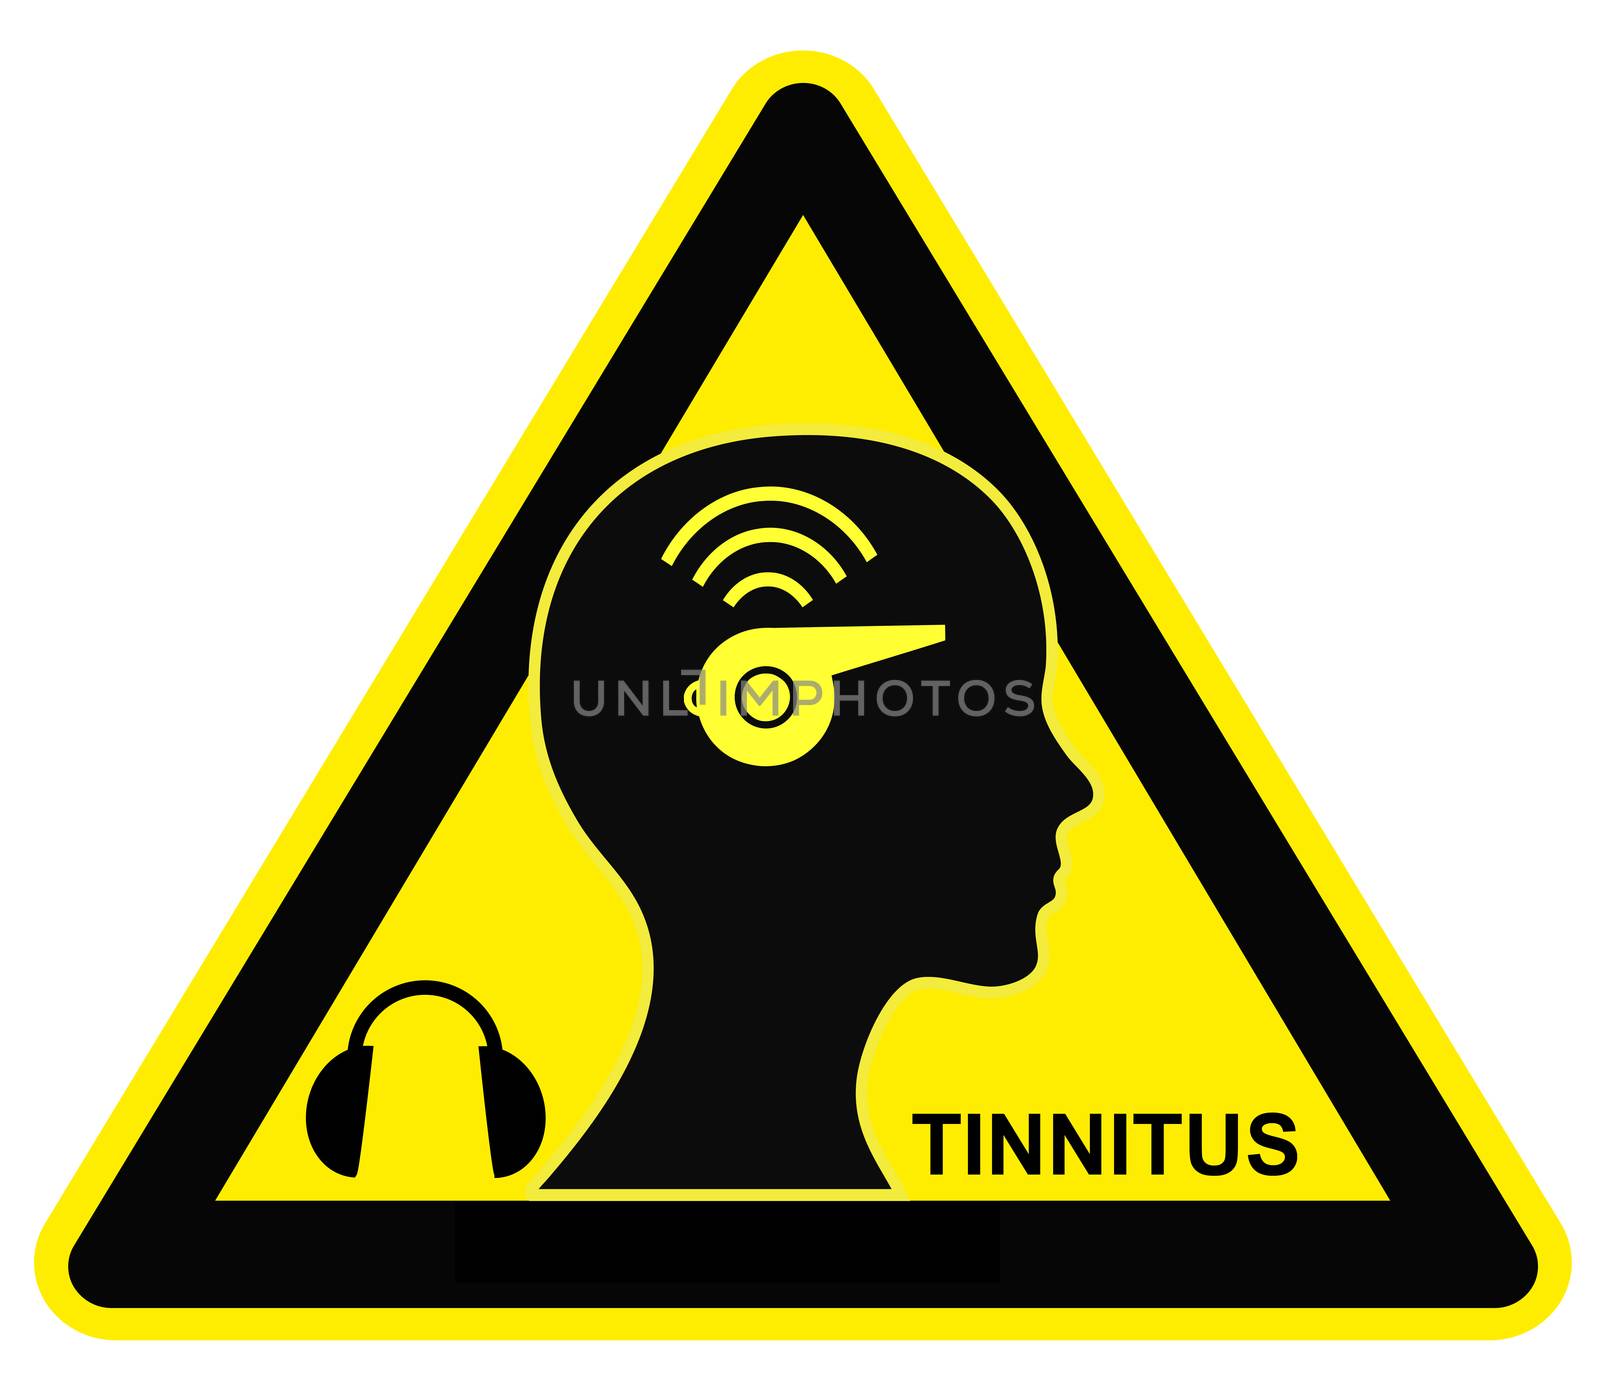 Wear ear protectors to avoid the annoying buzzing and ringing of tinnitus